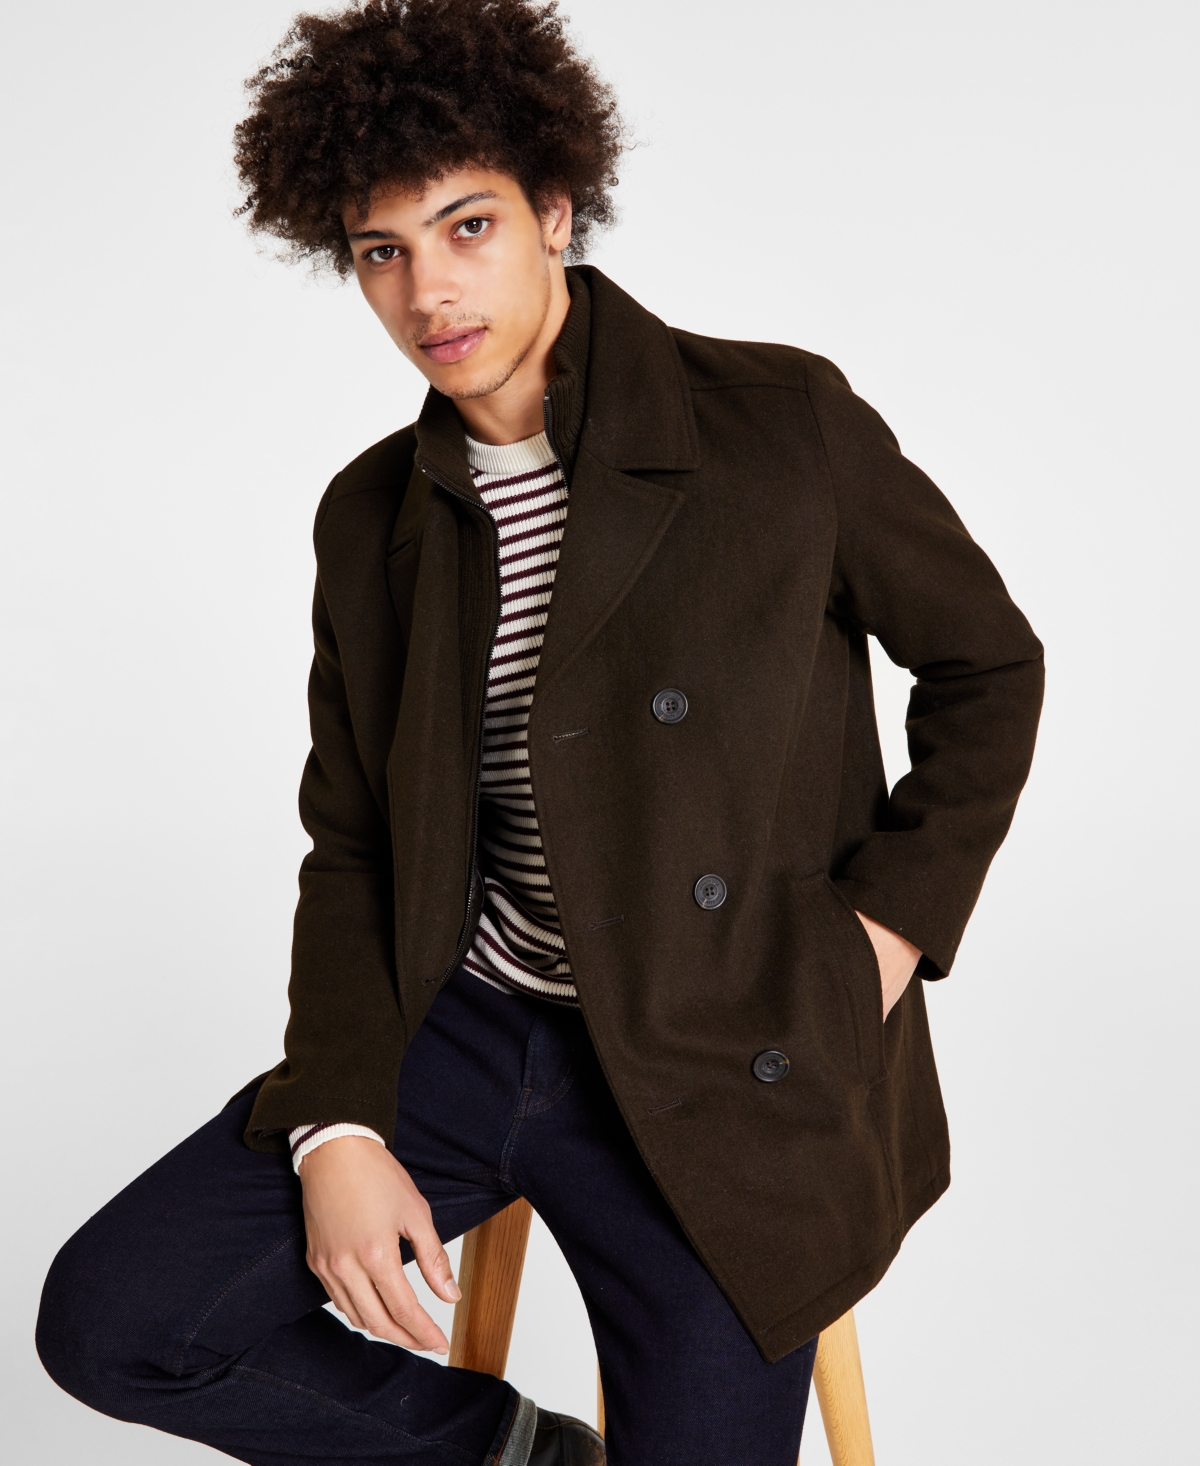 Coats: Kenneth Cole Men's Double Breasted Wool Blend Peacoat (Black) $62.50, Maralyn & Me Juniors' Hooded Faux-Fur-Trim Puffer Coat $22 + Free Store Pickup at Macy's or F/S on $25+